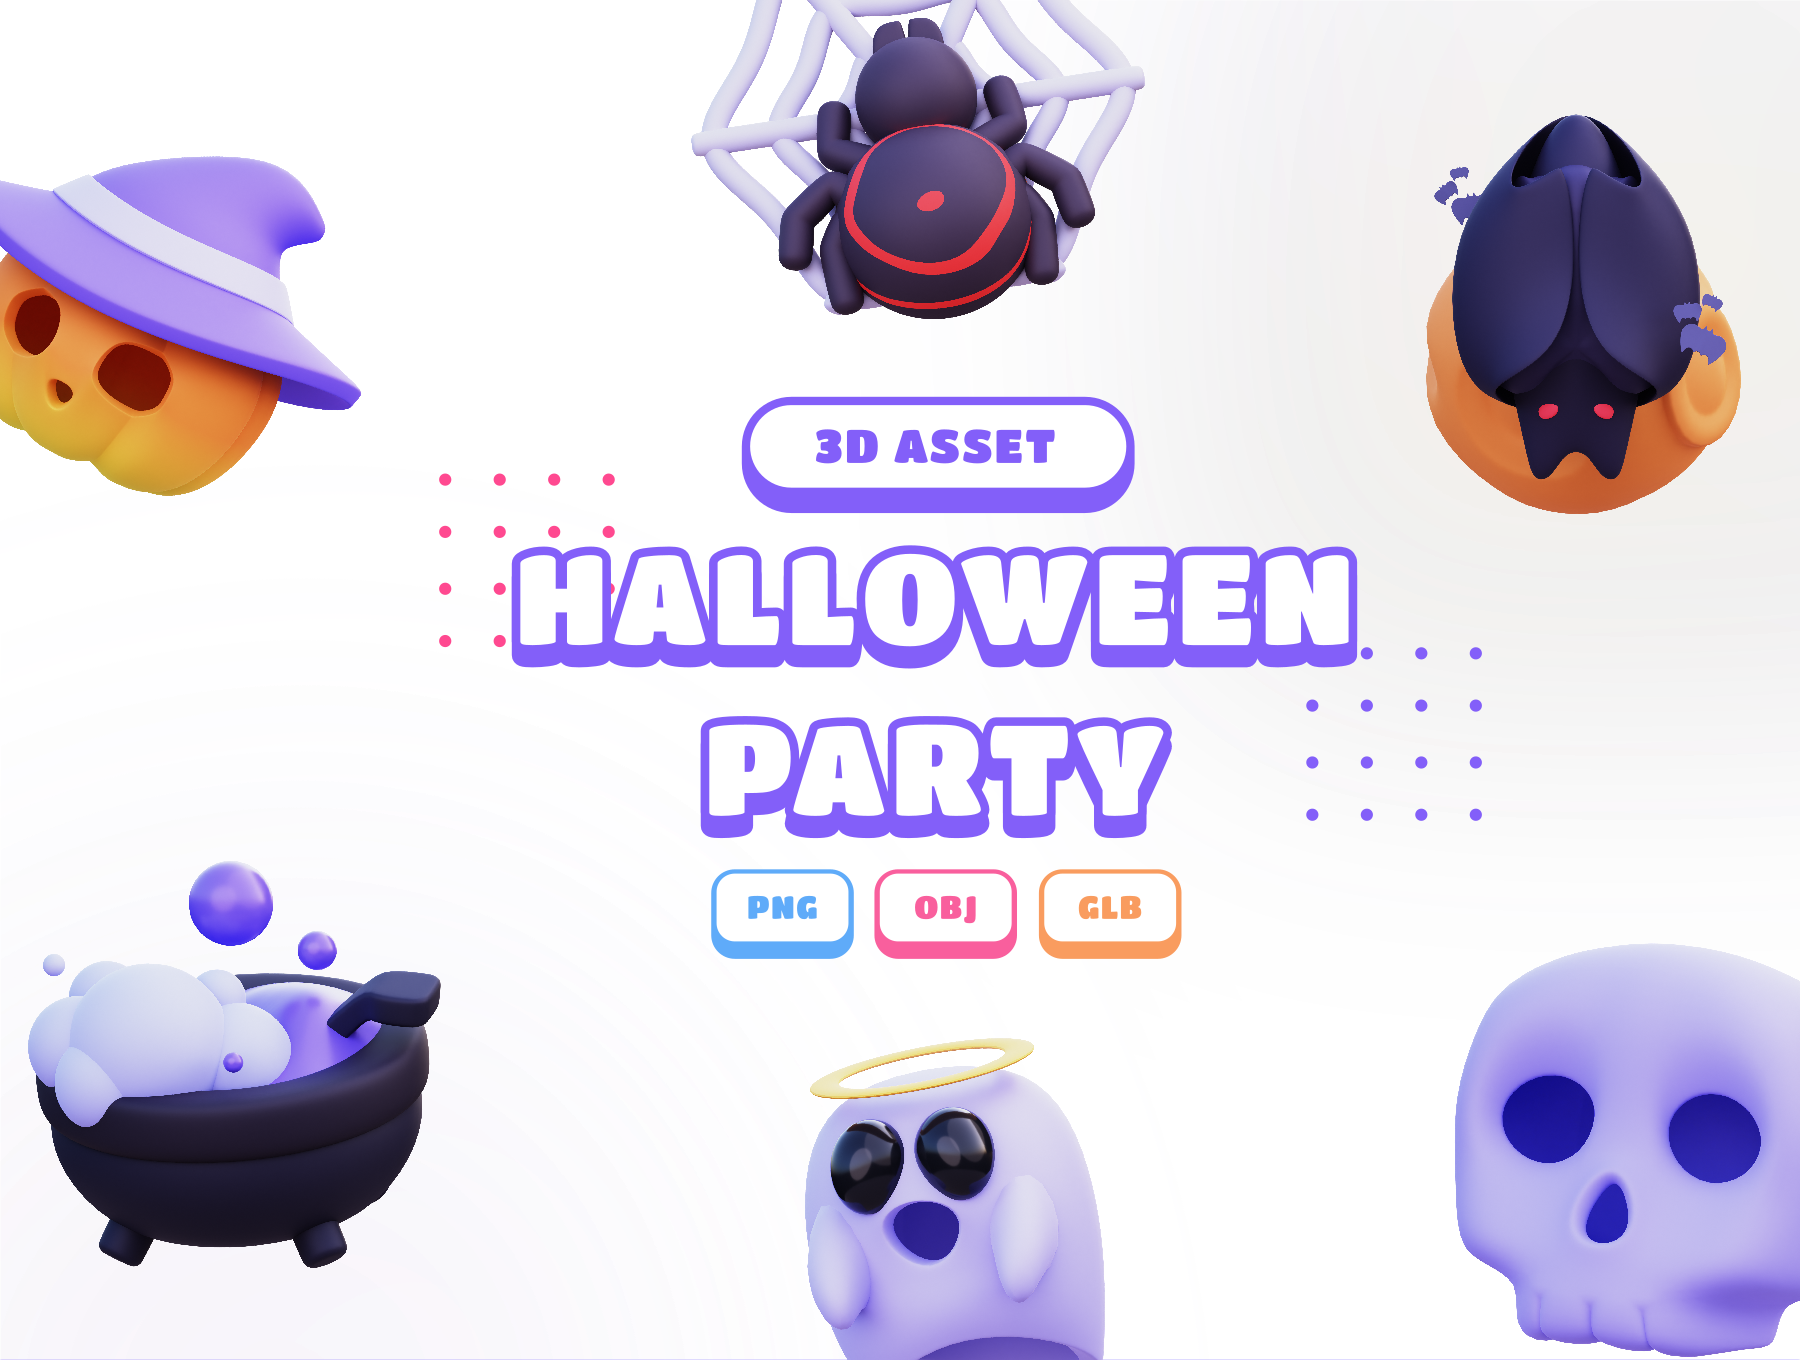 Royale High Halloween Halo 2020 but better quality